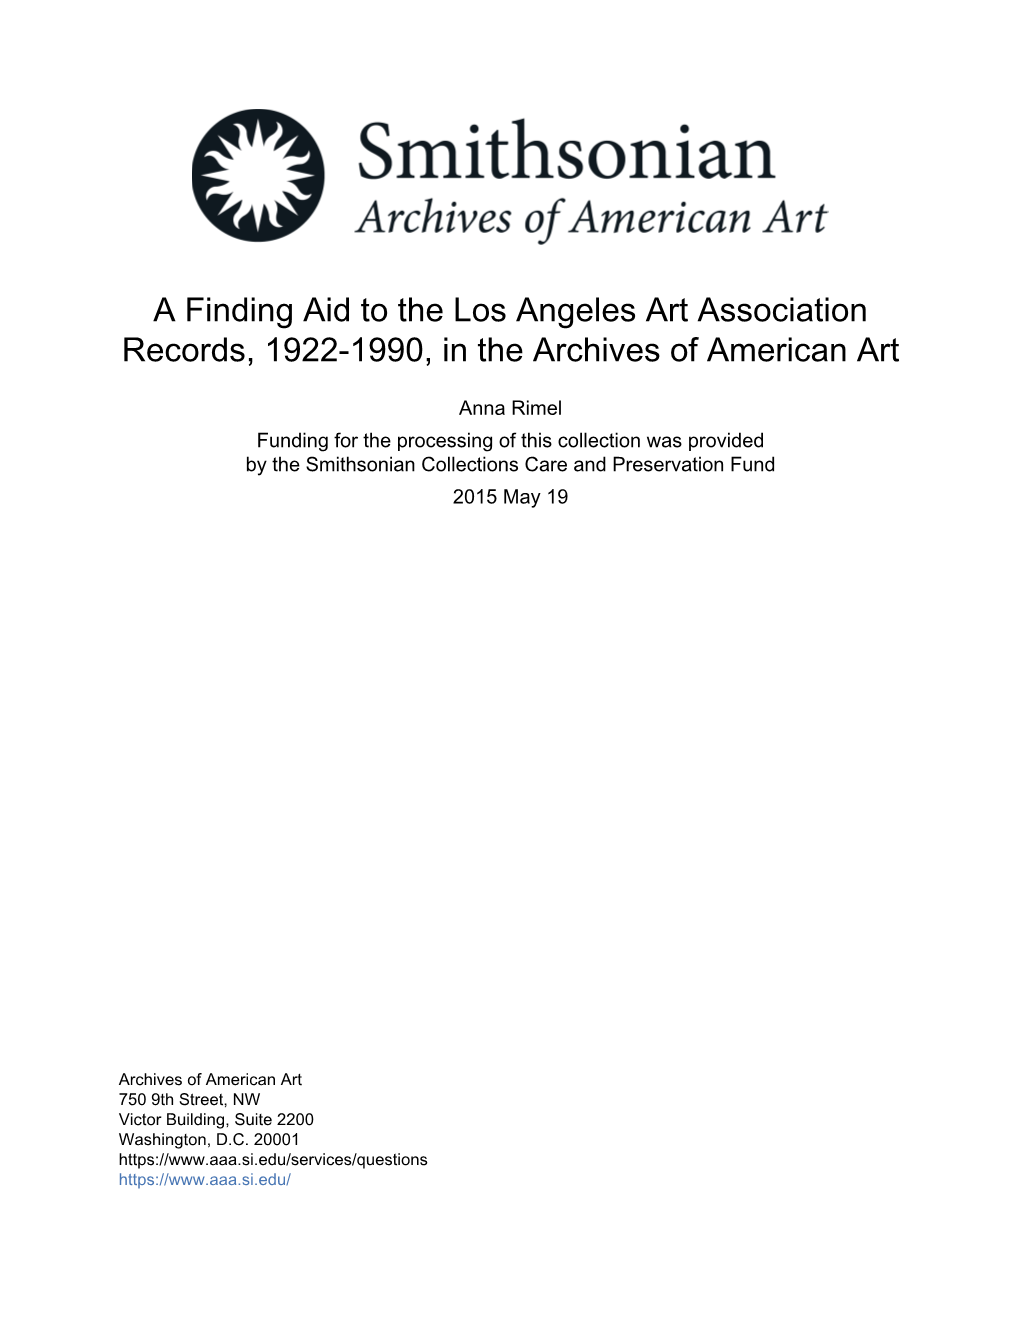 A Finding Aid to the Los Angeles Art Association Records, 1922-1990, in the Archives of American Art